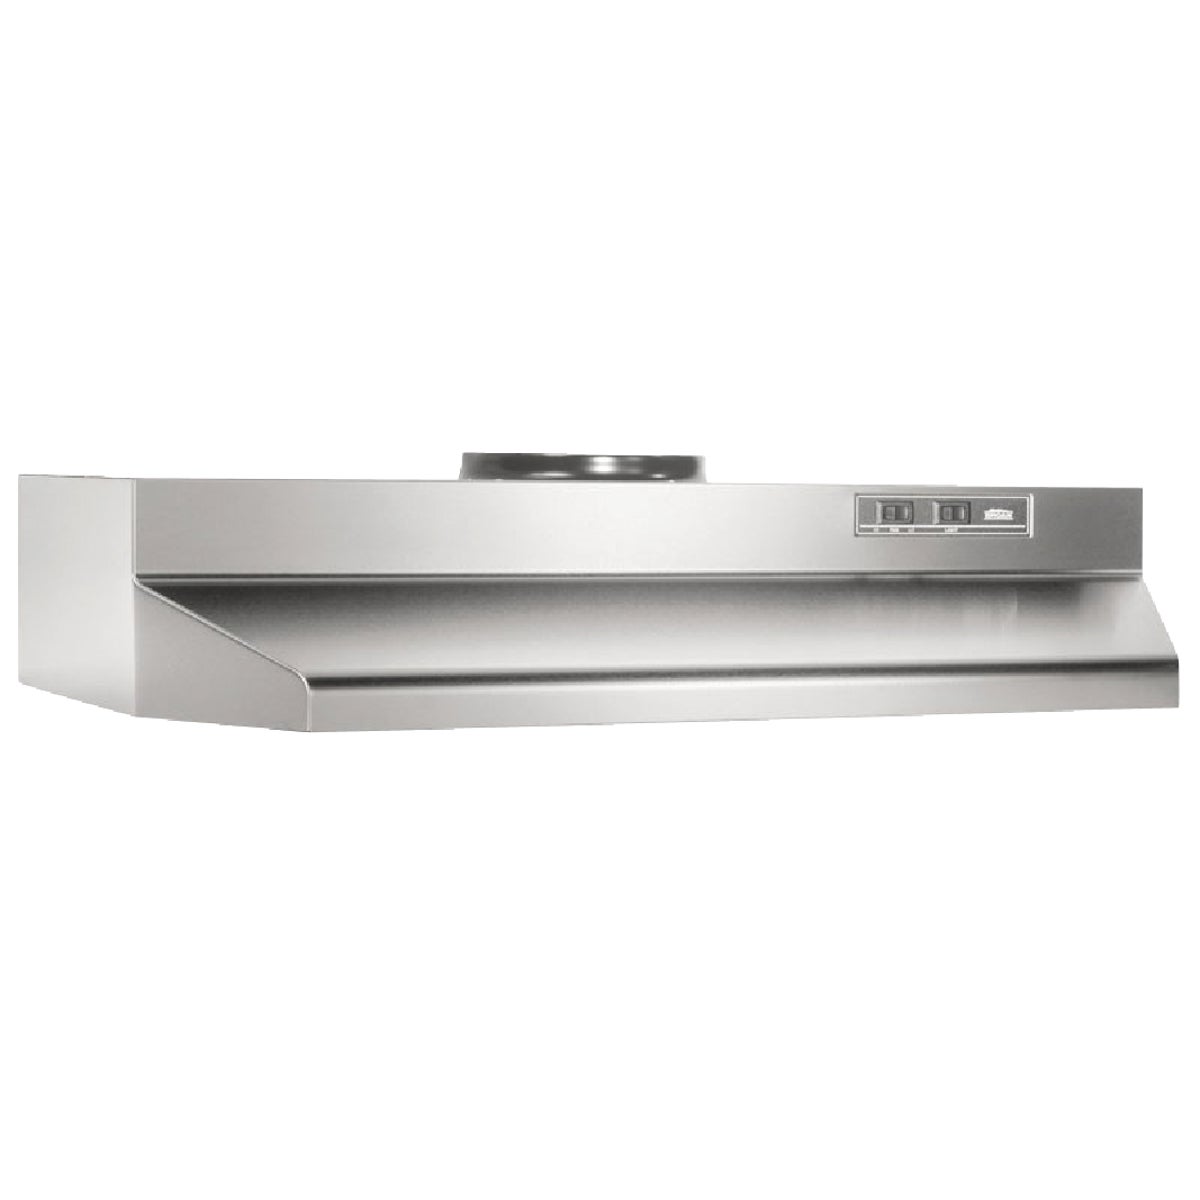 Item 281212, Contemporary style 4-way convertible range hood. Installs ducted 3-1/4 In.